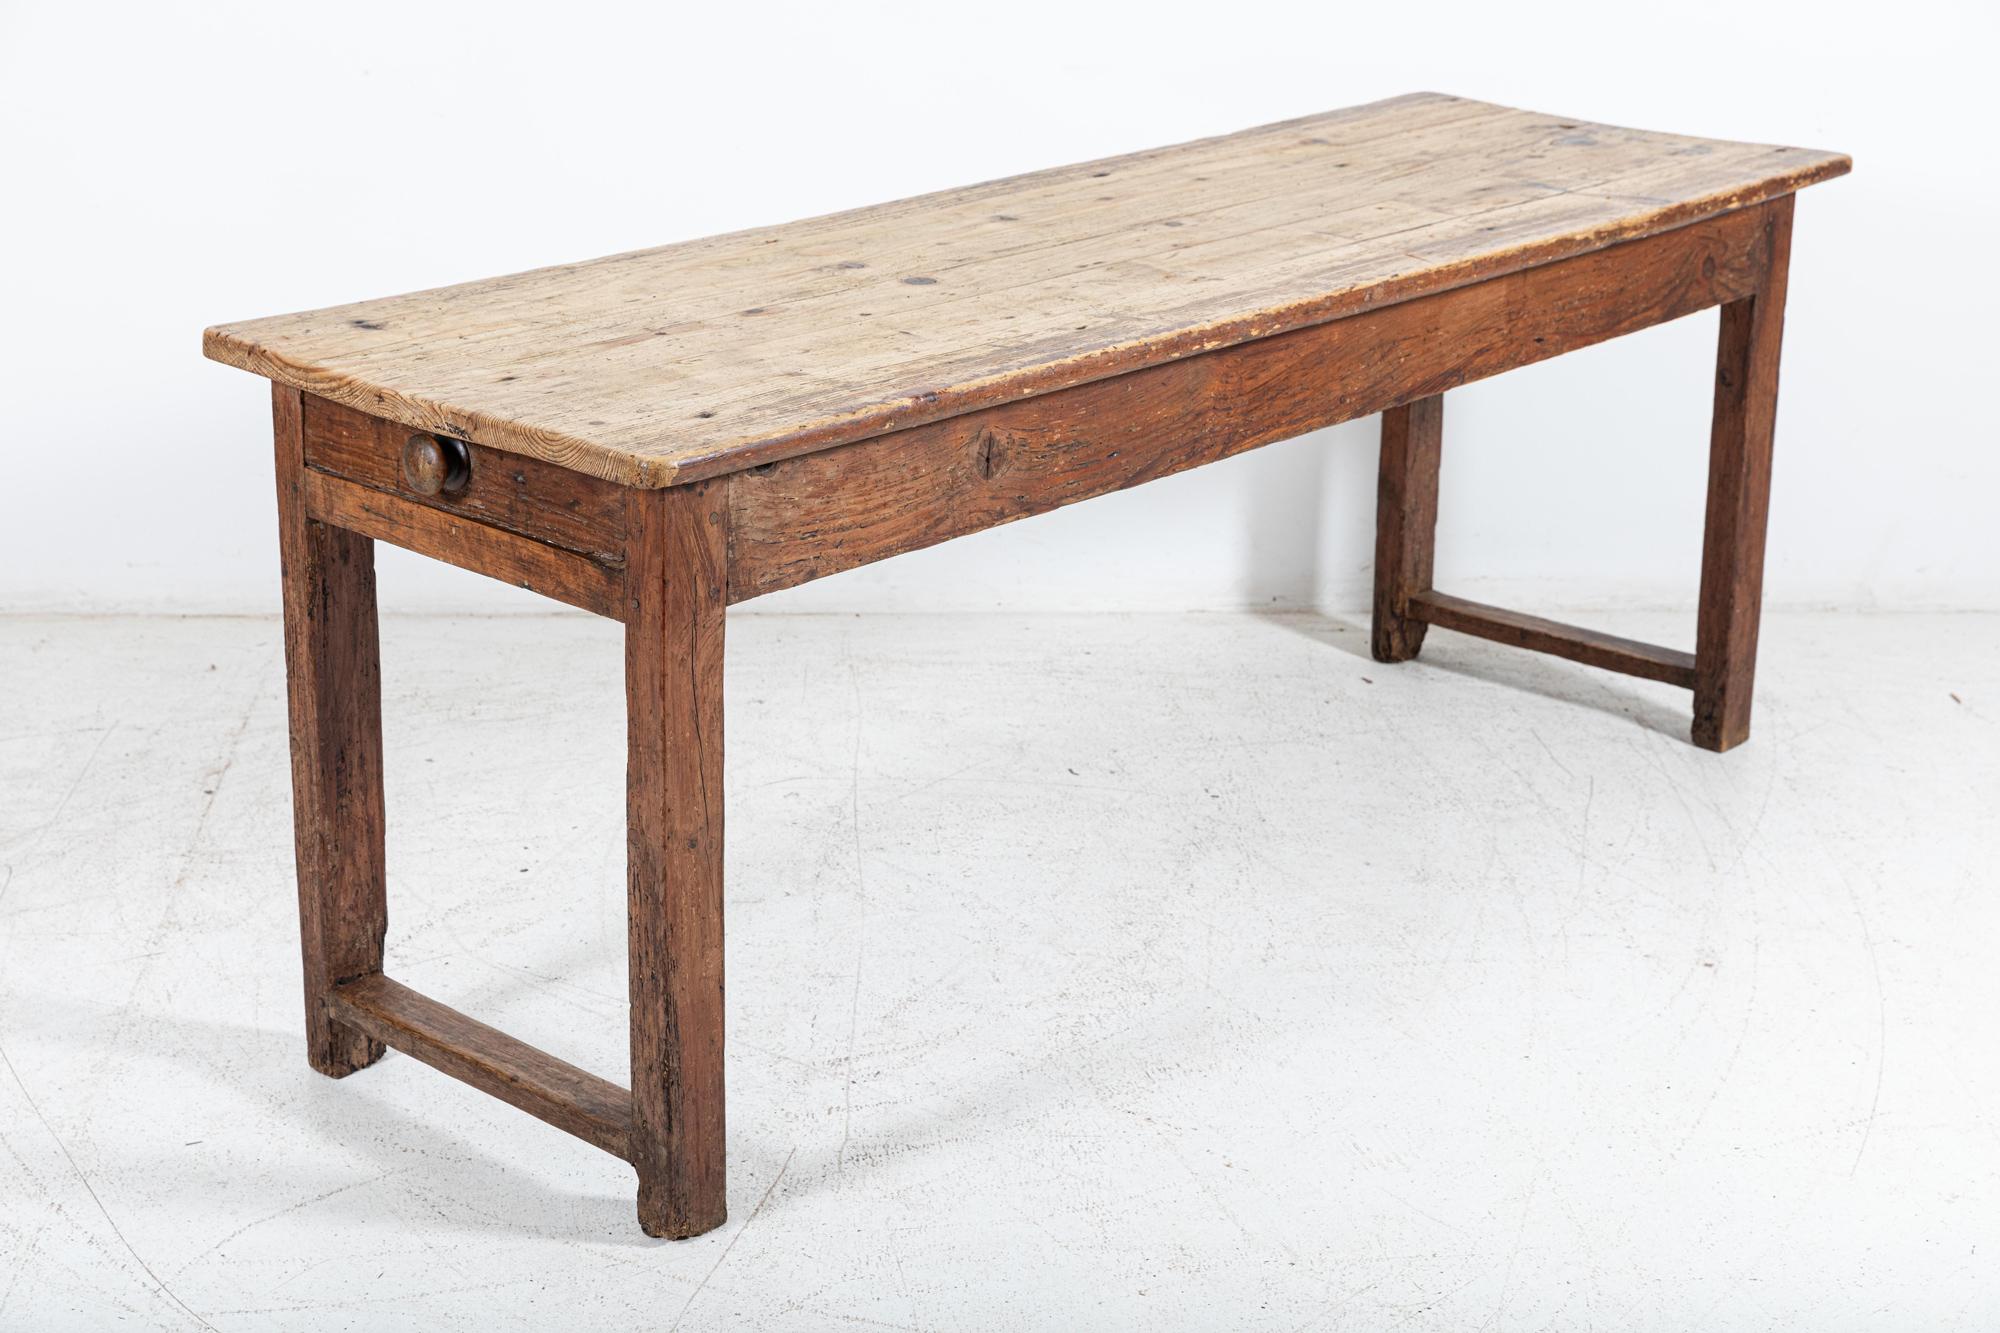 Circa 1870

19thC French Refectory table with a pine top and fruitwood carcass. With a single cutlery drawer to to one end raised on upright square supports united by a single stretcher.

An excellent rustic example

Measures: W 200 x D 64 x H